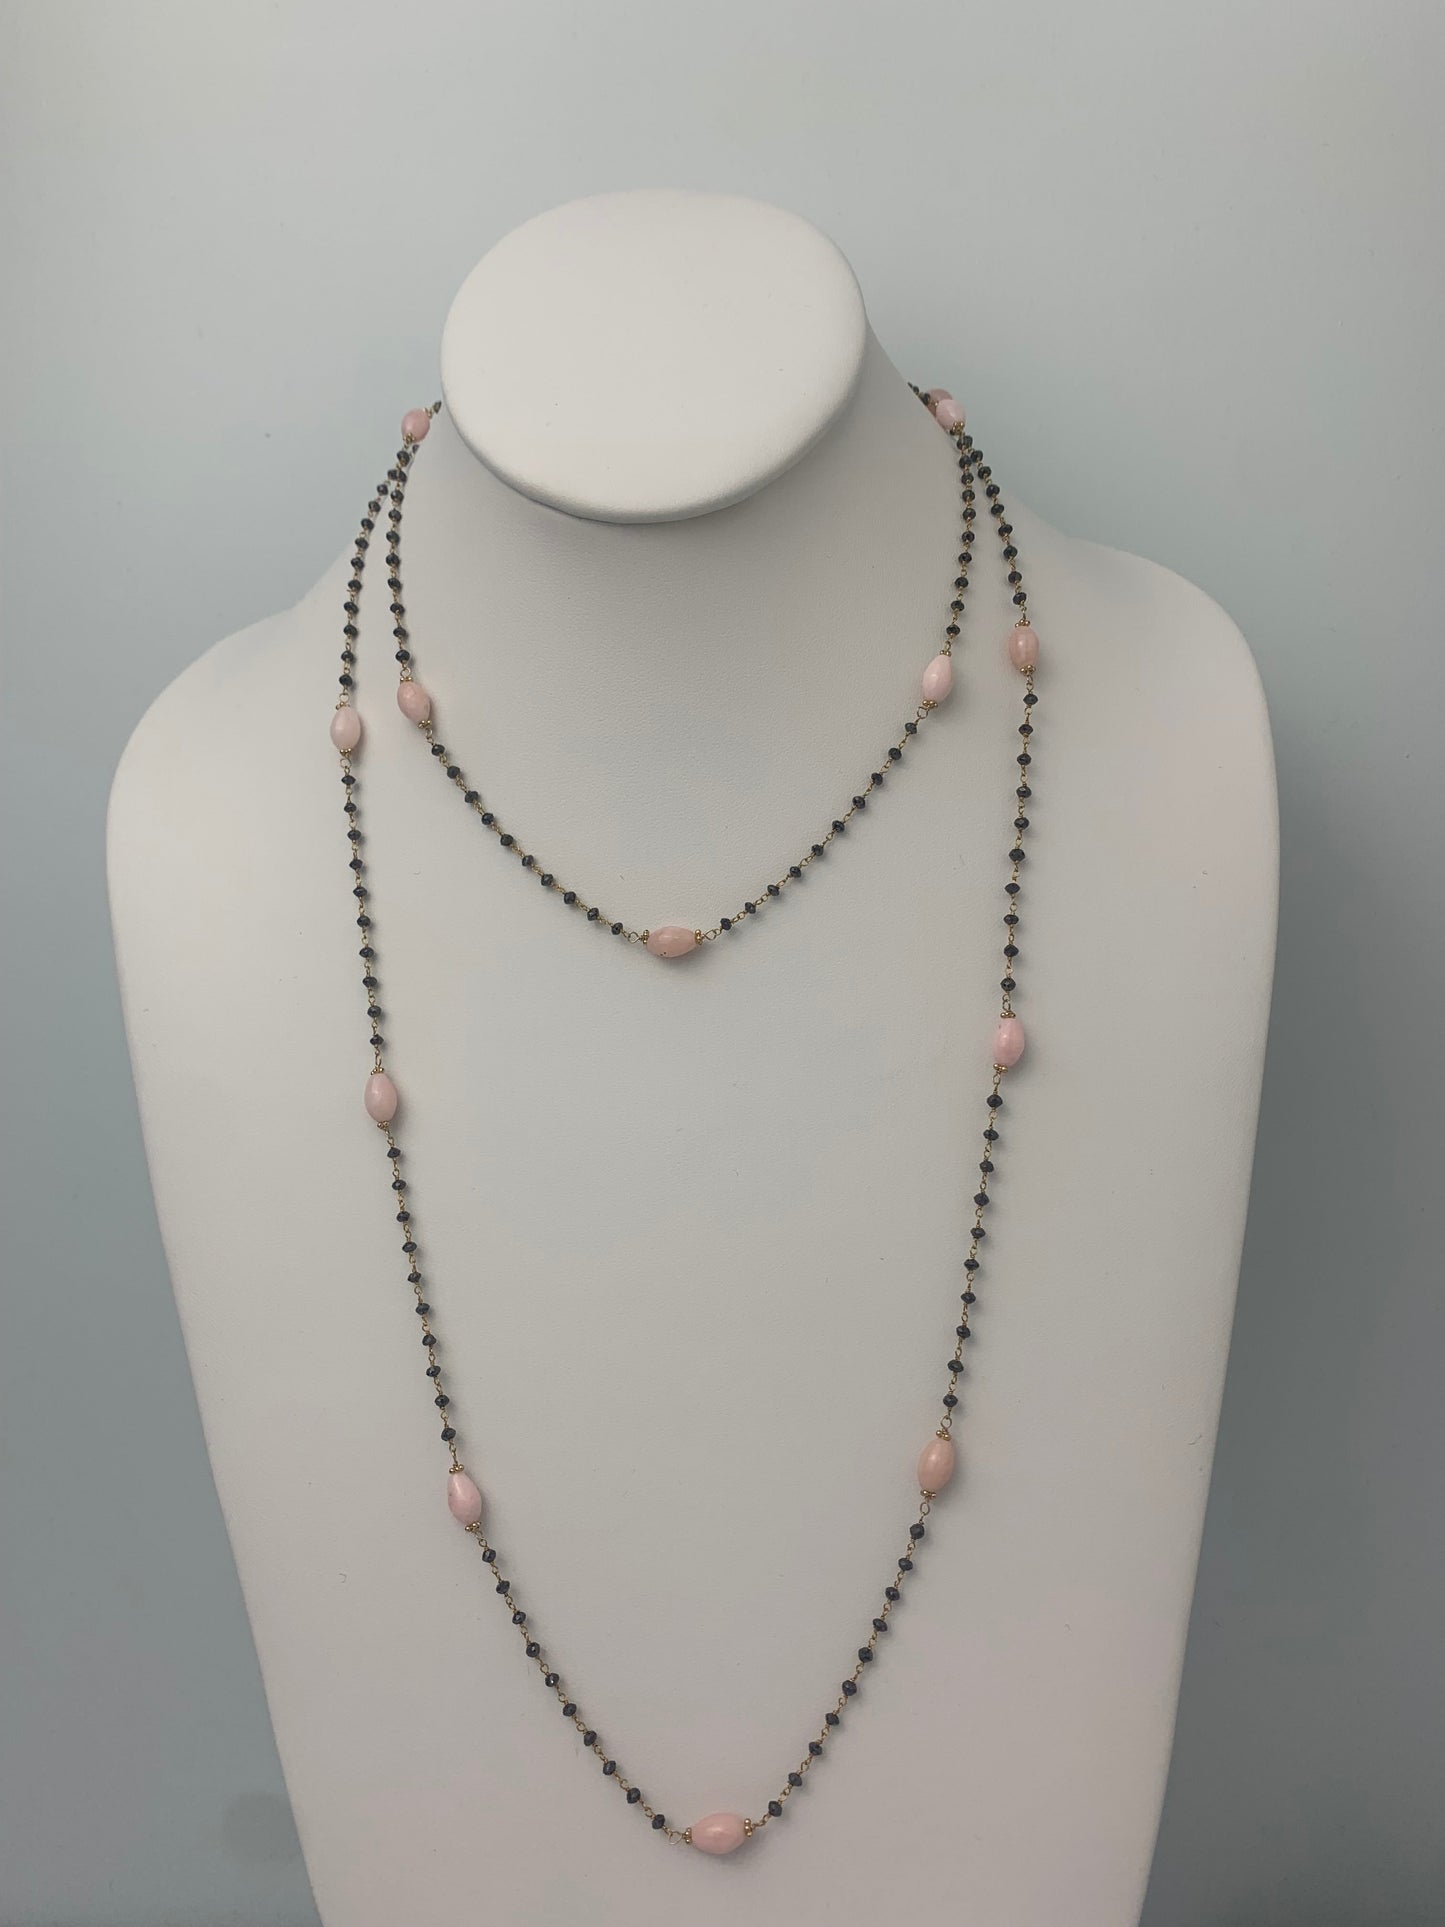 41" Pink Opal and Black Diamond 14 Station Rosary Necklace in 14KY - NCK-068-ROSDIAGM14Y-BLKPKO-41 14.20ctw